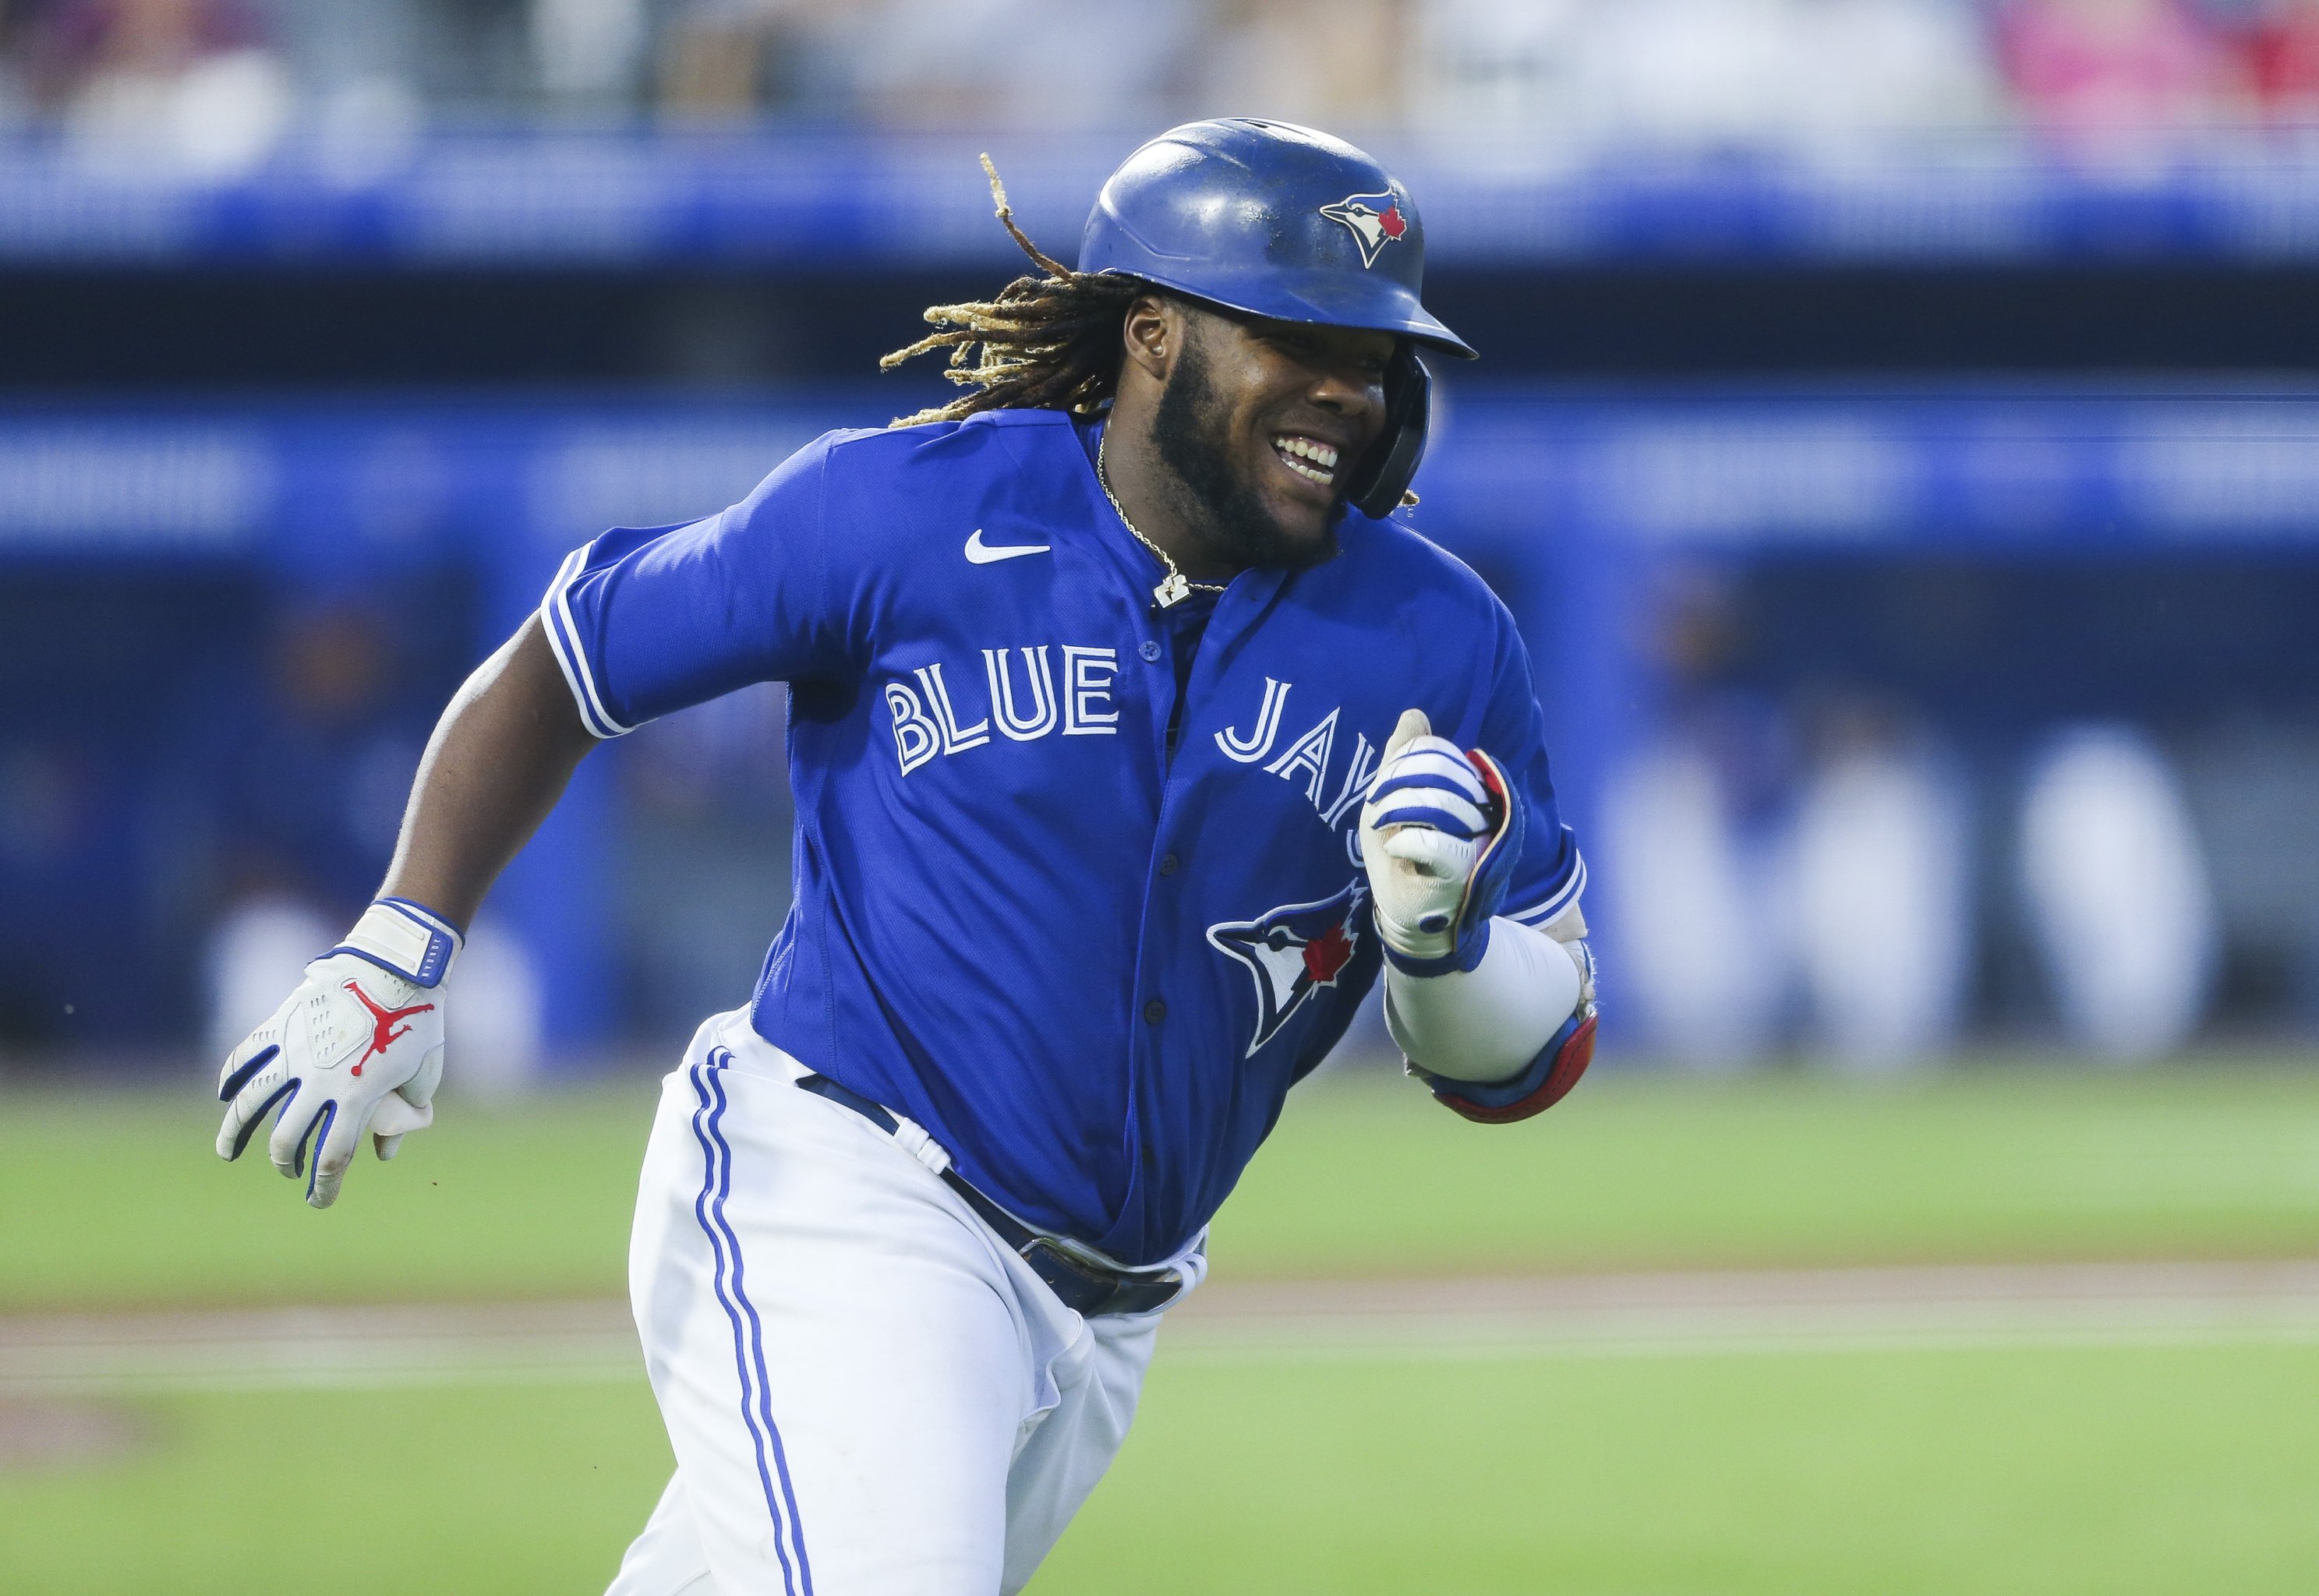 Top 25 MLB Players Under 25 For 2019 – M-SABR